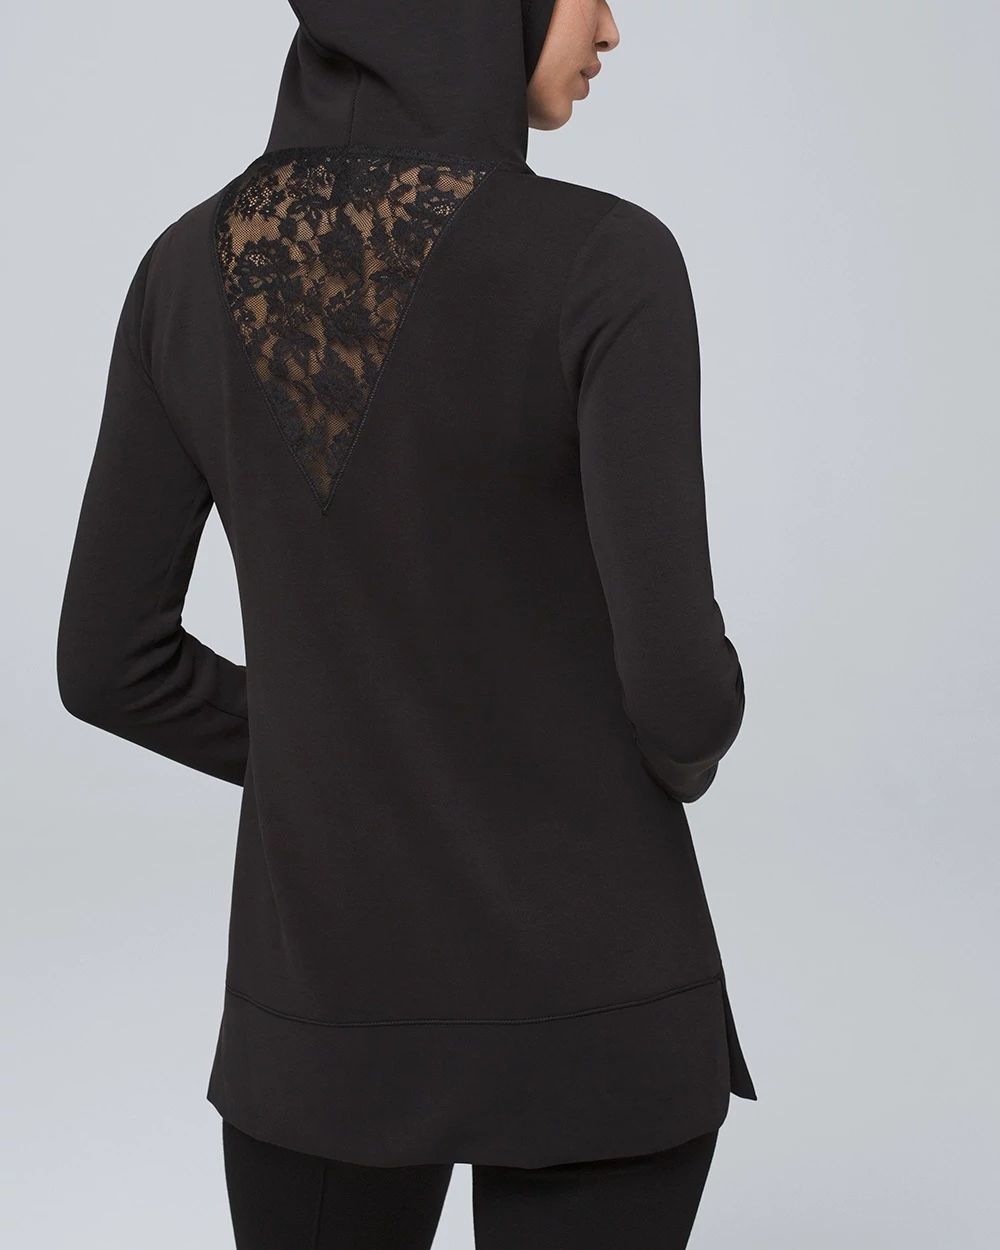 WHBM WKND Lace Inset Tunic click to view larger image.